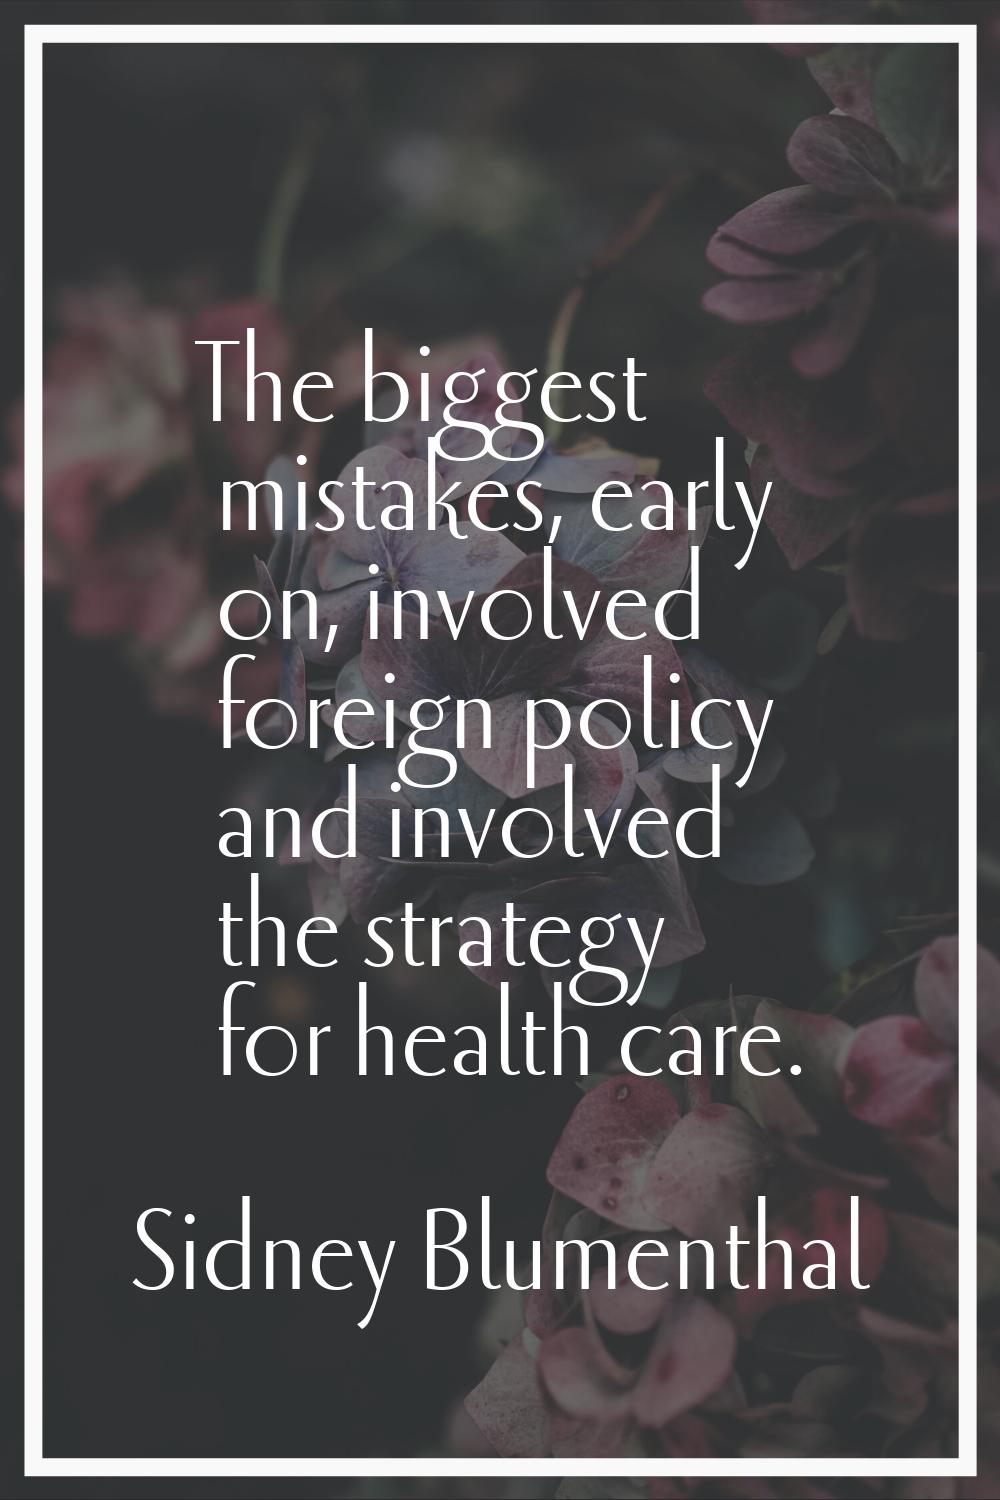 The biggest mistakes, early on, involved foreign policy and involved the strategy for health care.